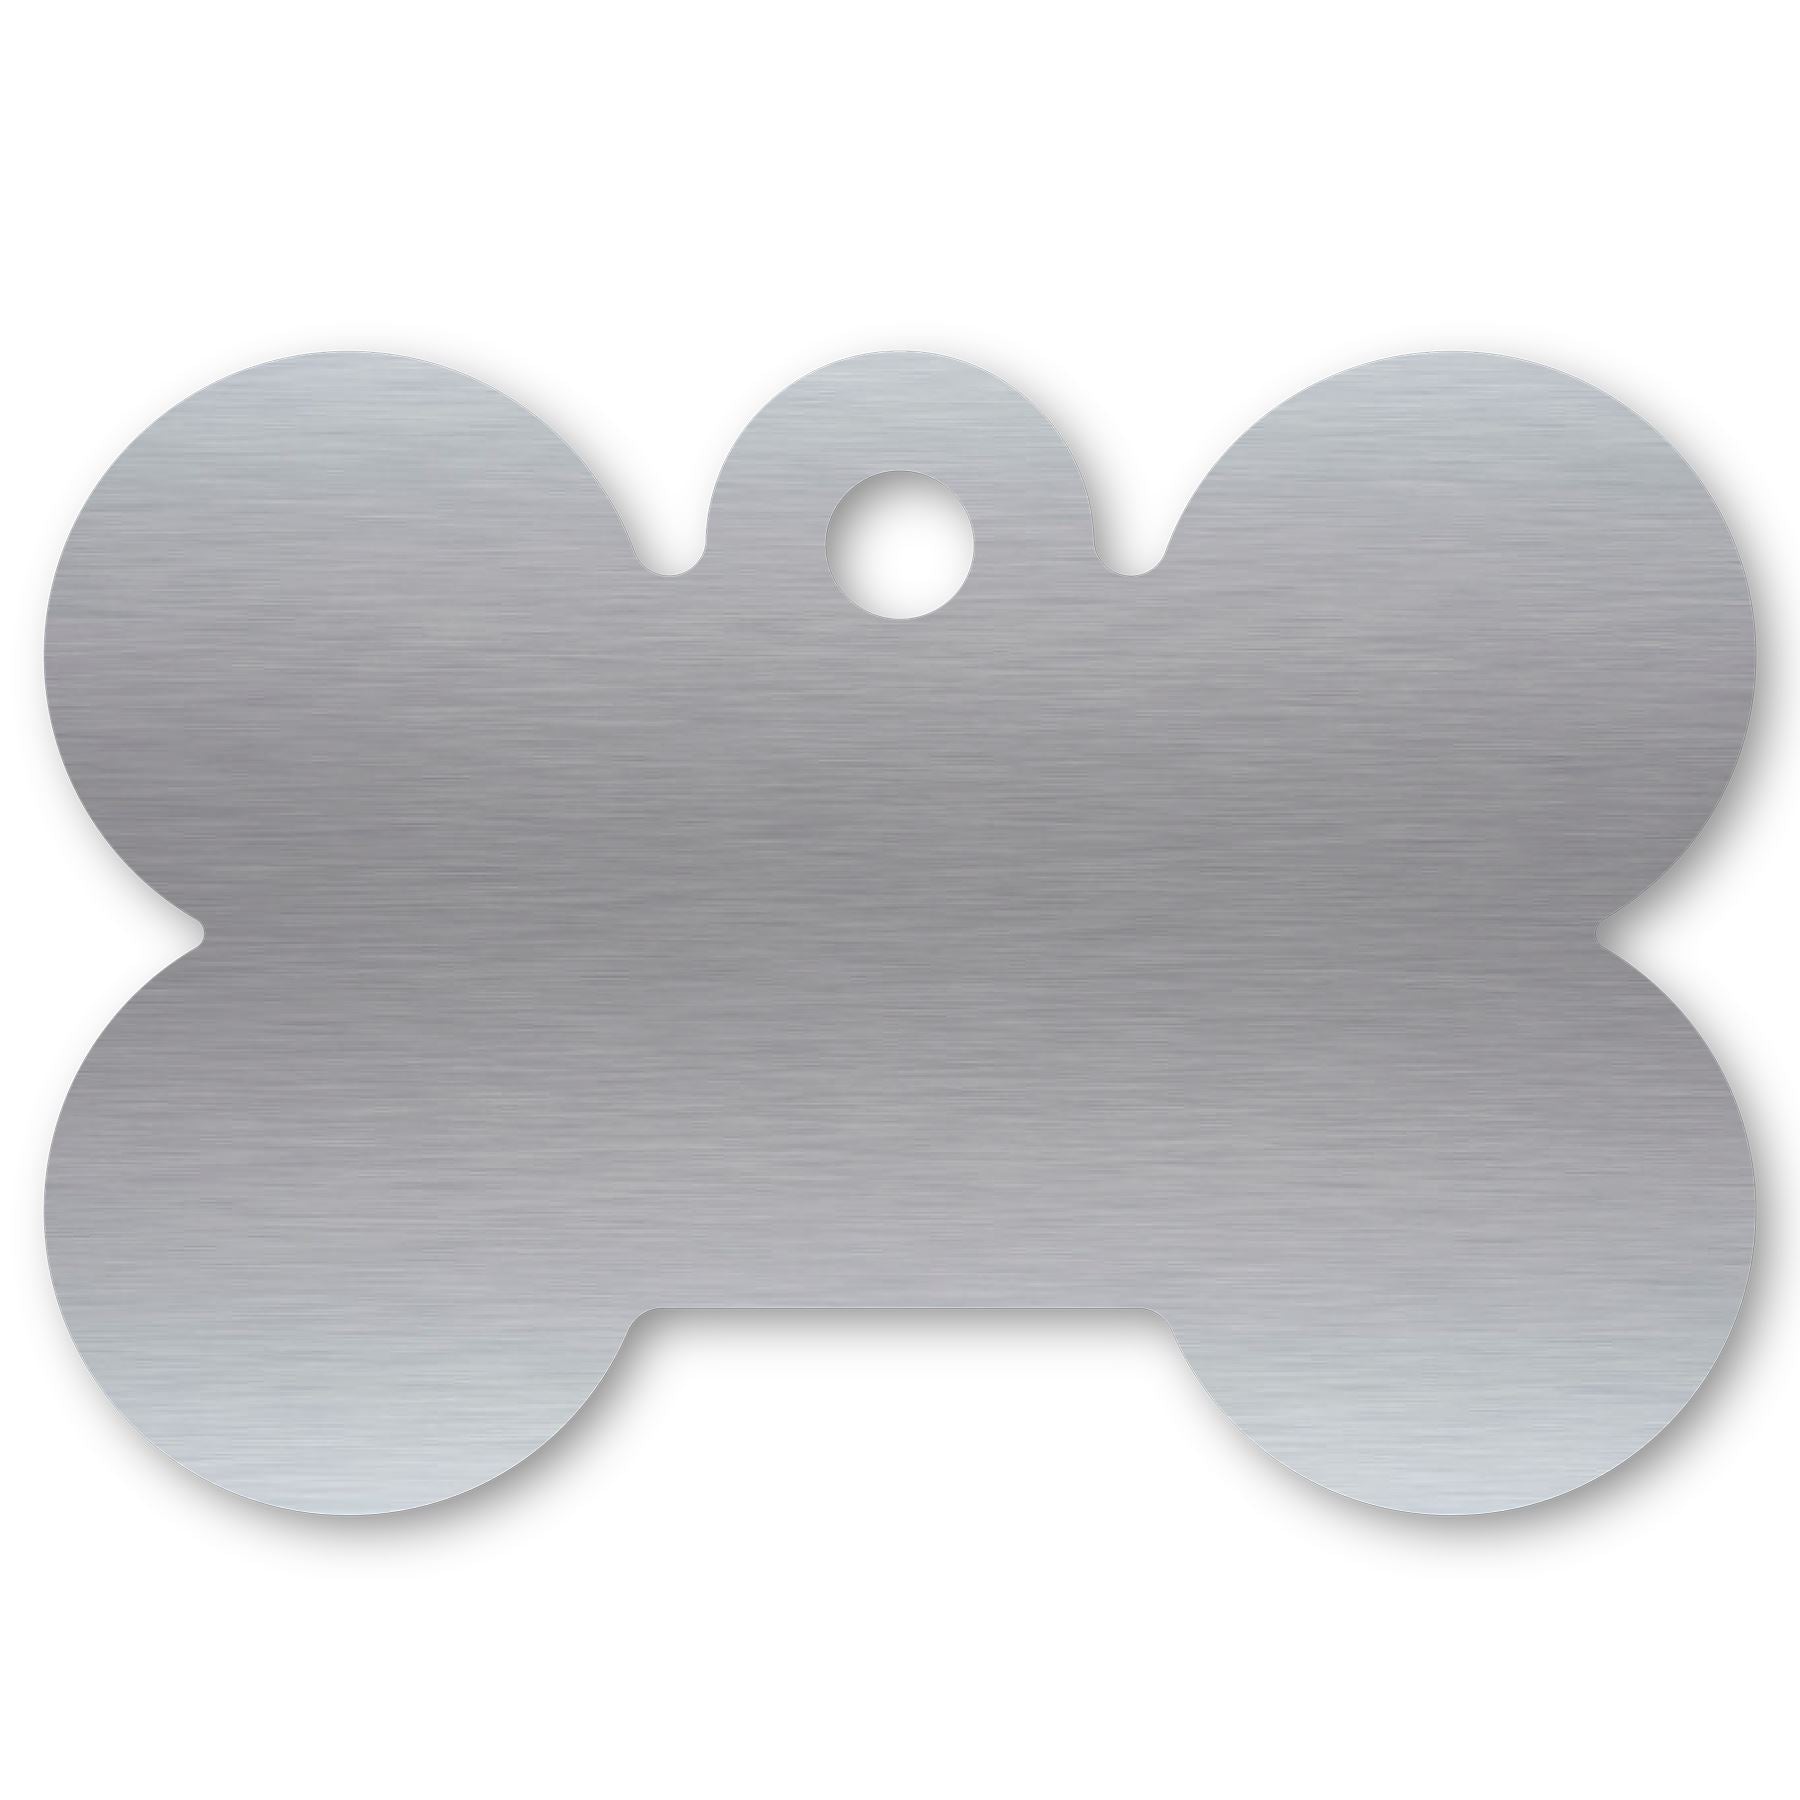 Anodized Aluminum Dog Bone Shaped Tags, 1-1/32" x 1-5/16" with 1/8" Hole, Laser Engraved Metal Tags Craftworks NW Silver 